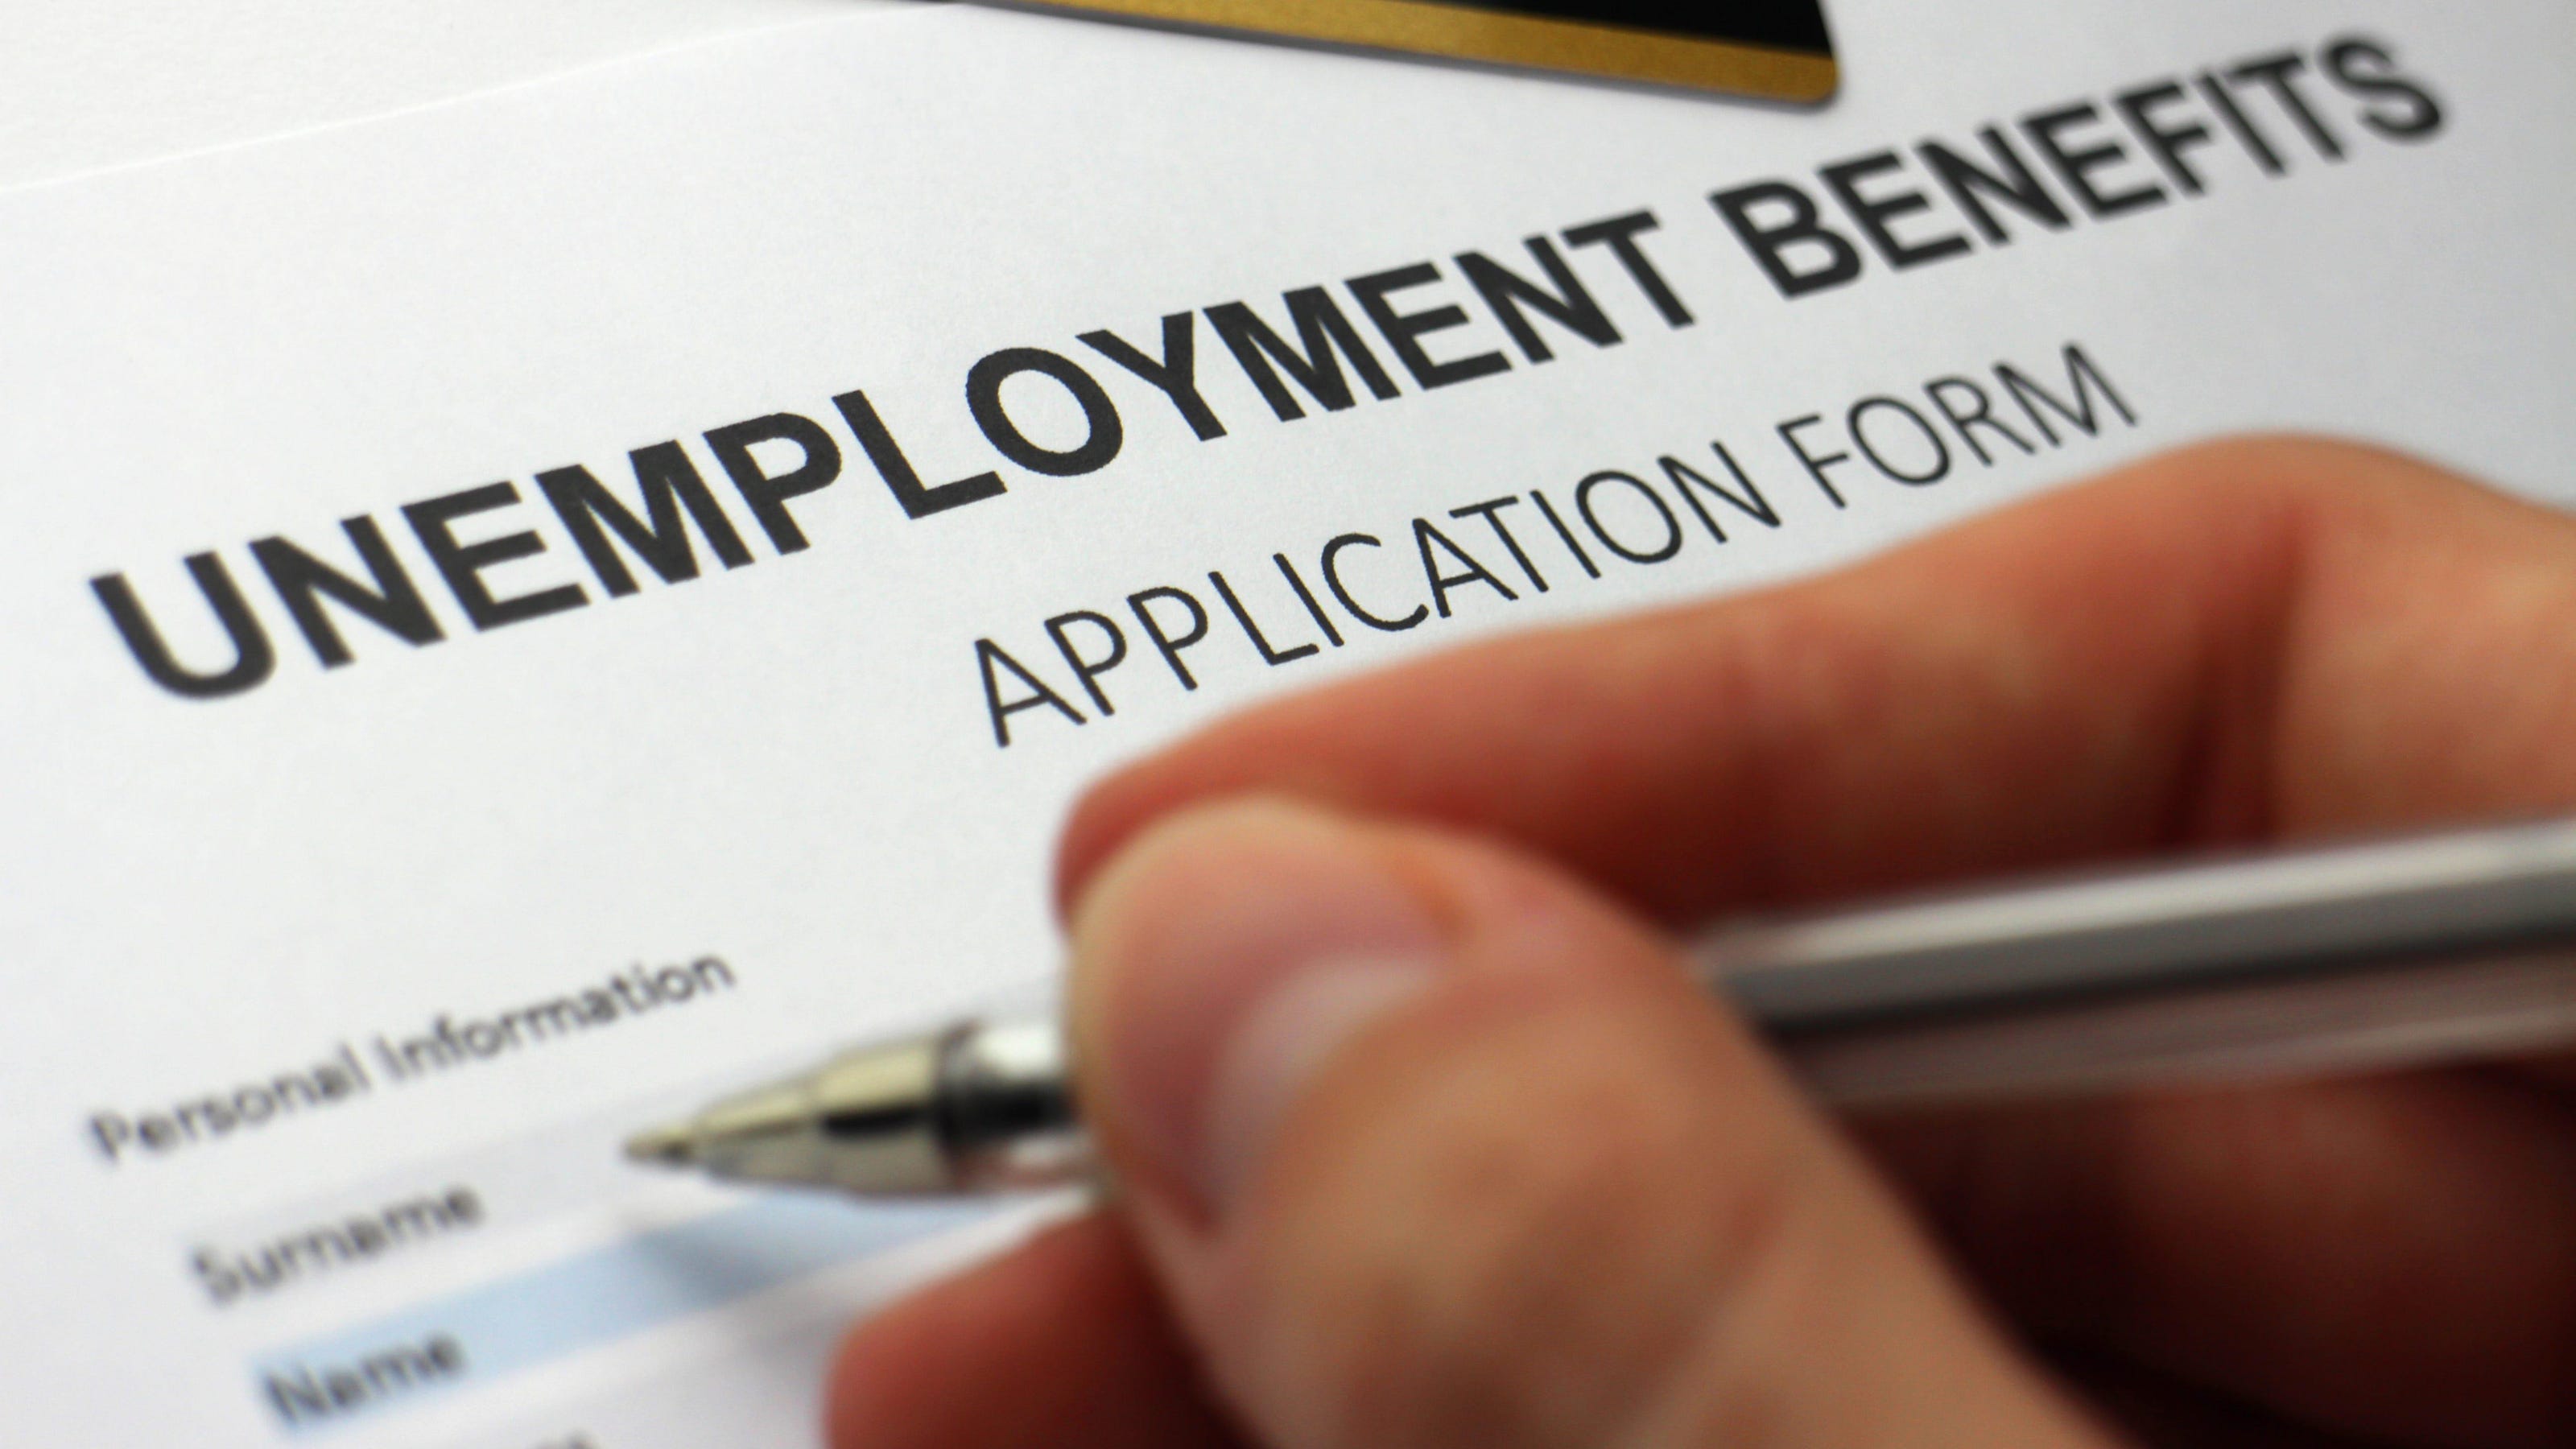 New York overpaid $28M in unemployment benefits. Some want it